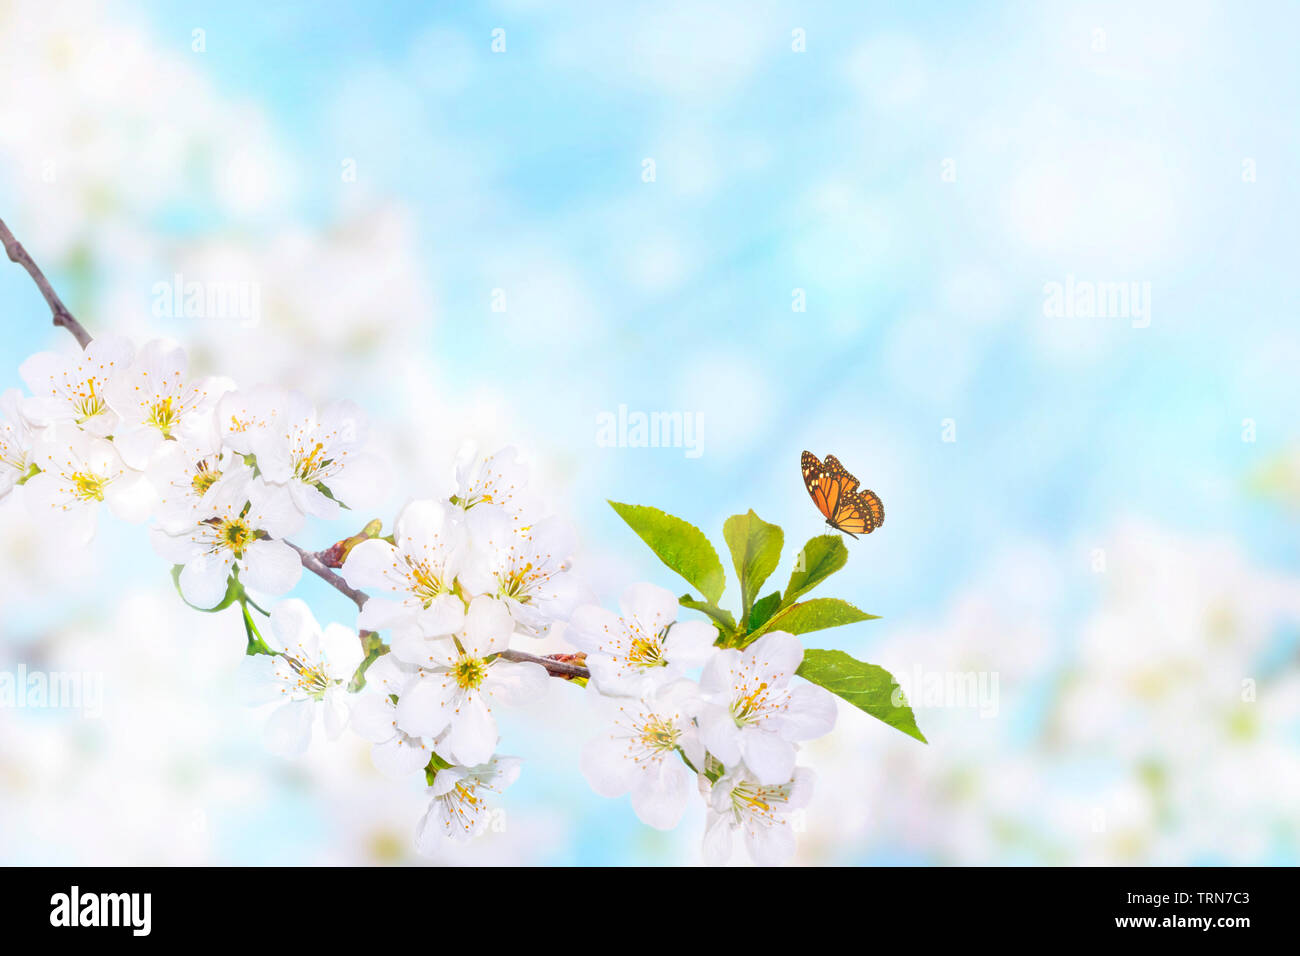 Butterfly on a branch of white spring blossom over blue sunny bokeh background close-up. Stock Photo